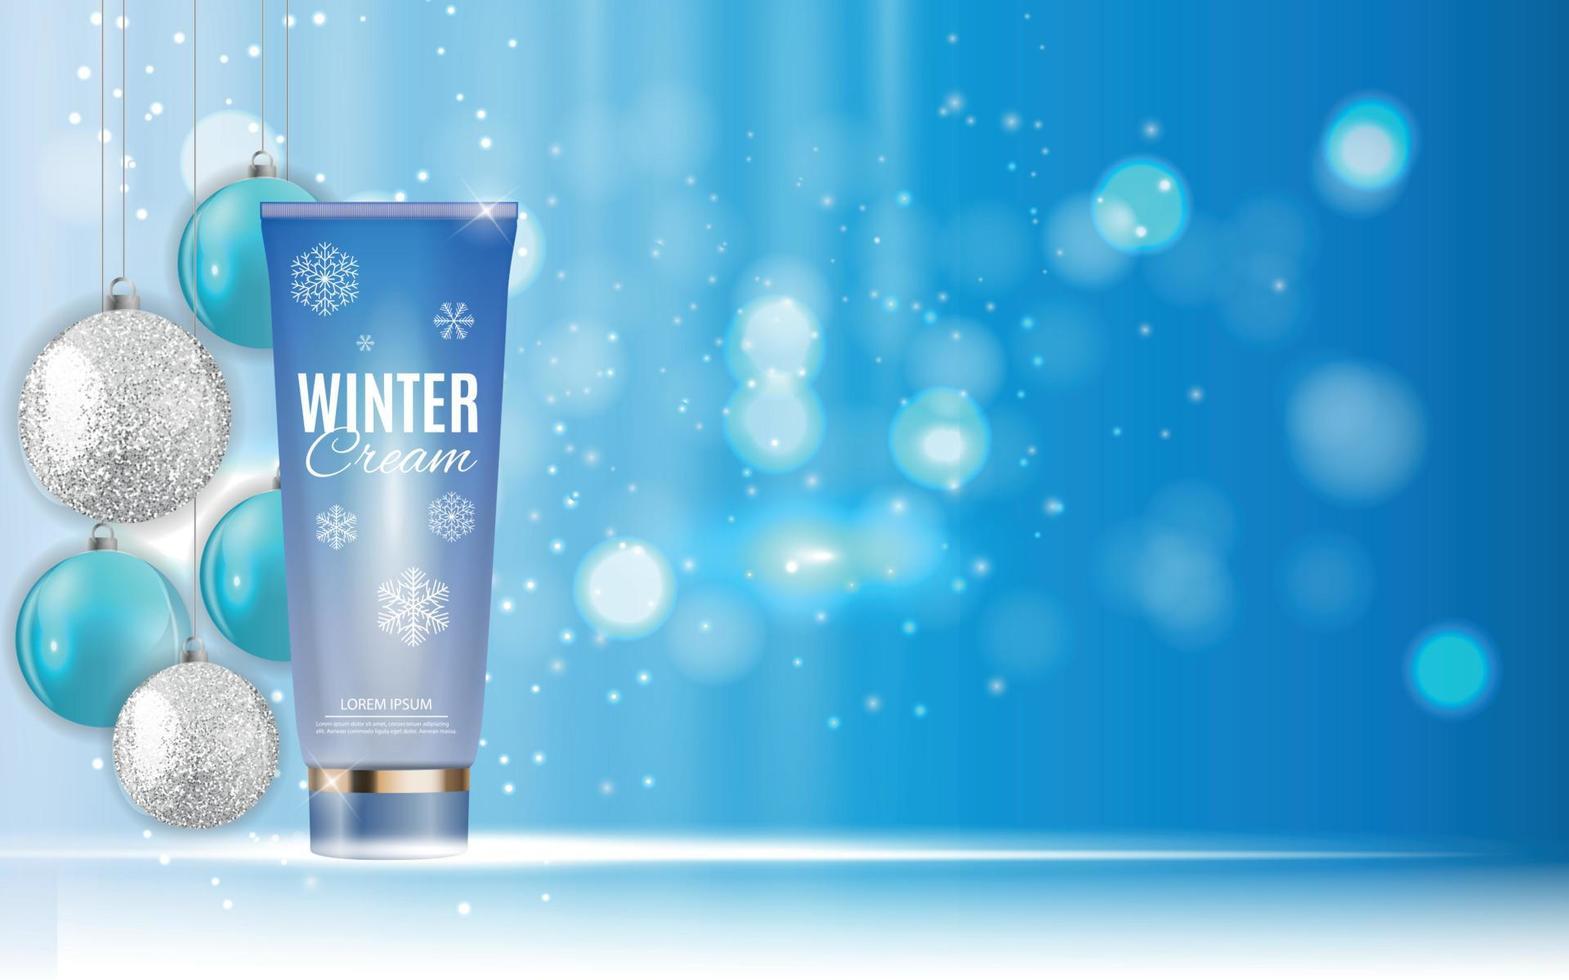 Hand Care Winter Cream Bottle, Tube Template for Ads or Magazine Background. 3D Realistic Vector Iillustration